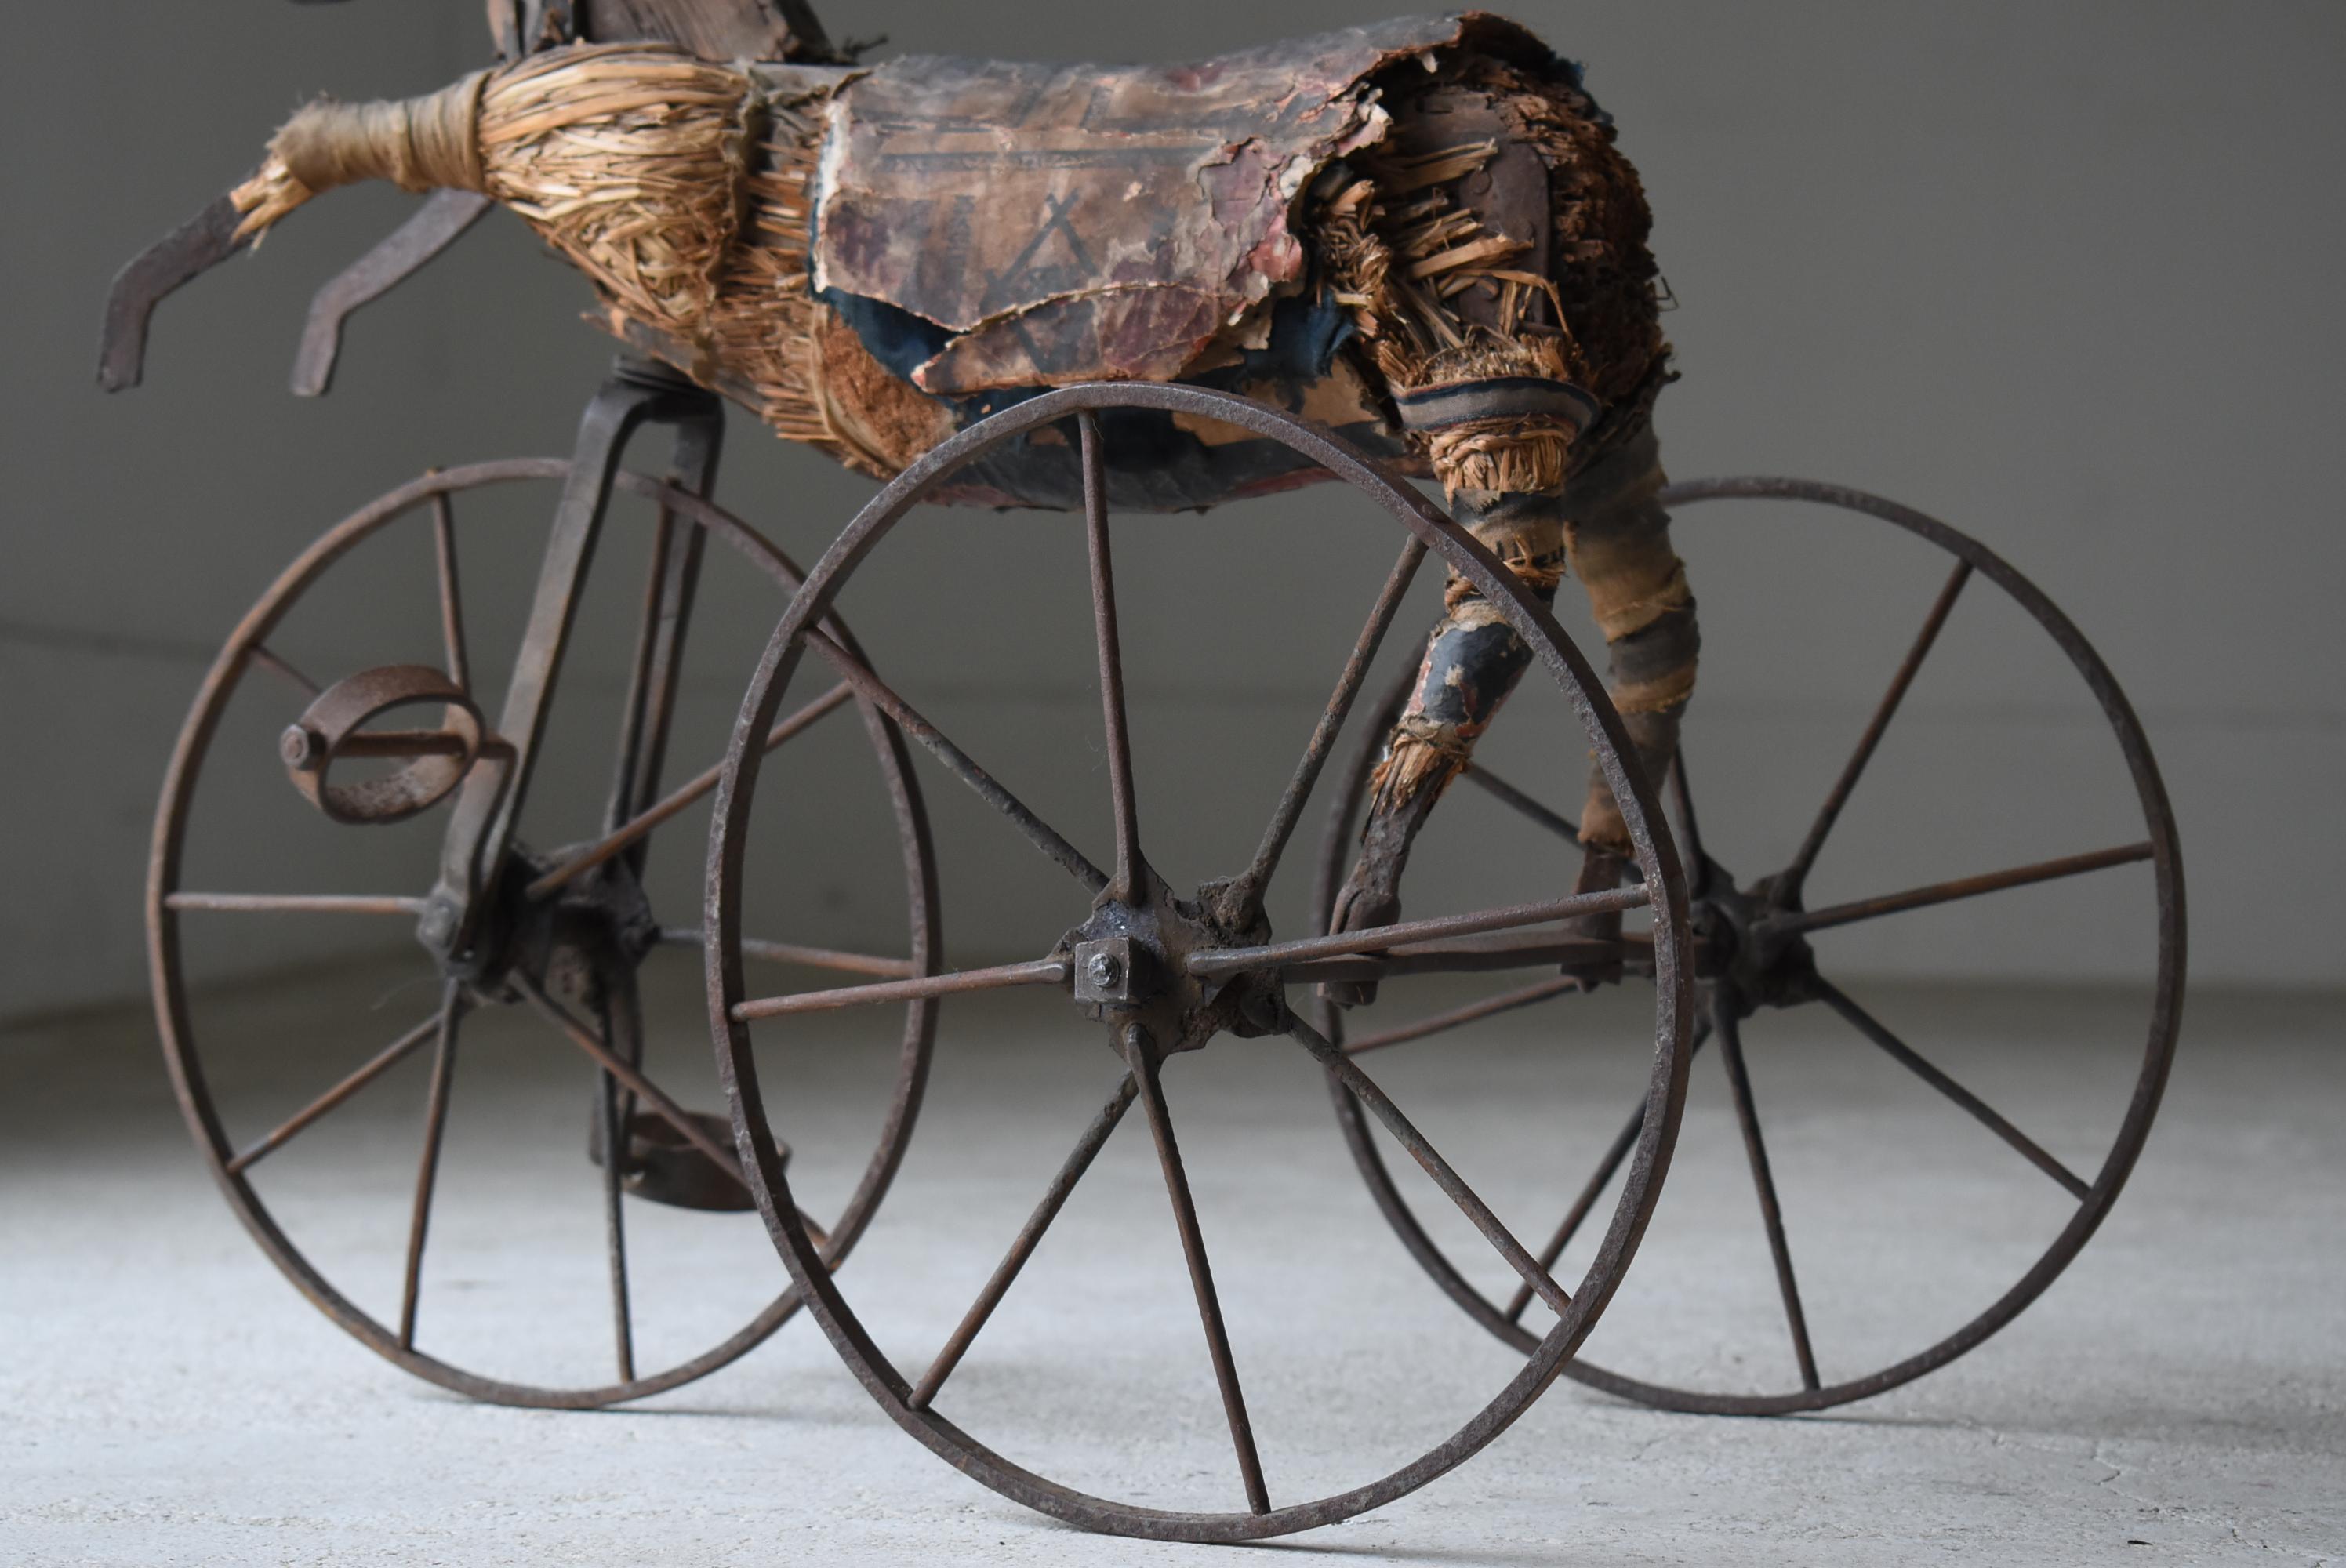 Japanese Antique Wooden Horse Tricycle 1860s-1900s / Sculpture Wabisabi  For Sale 2